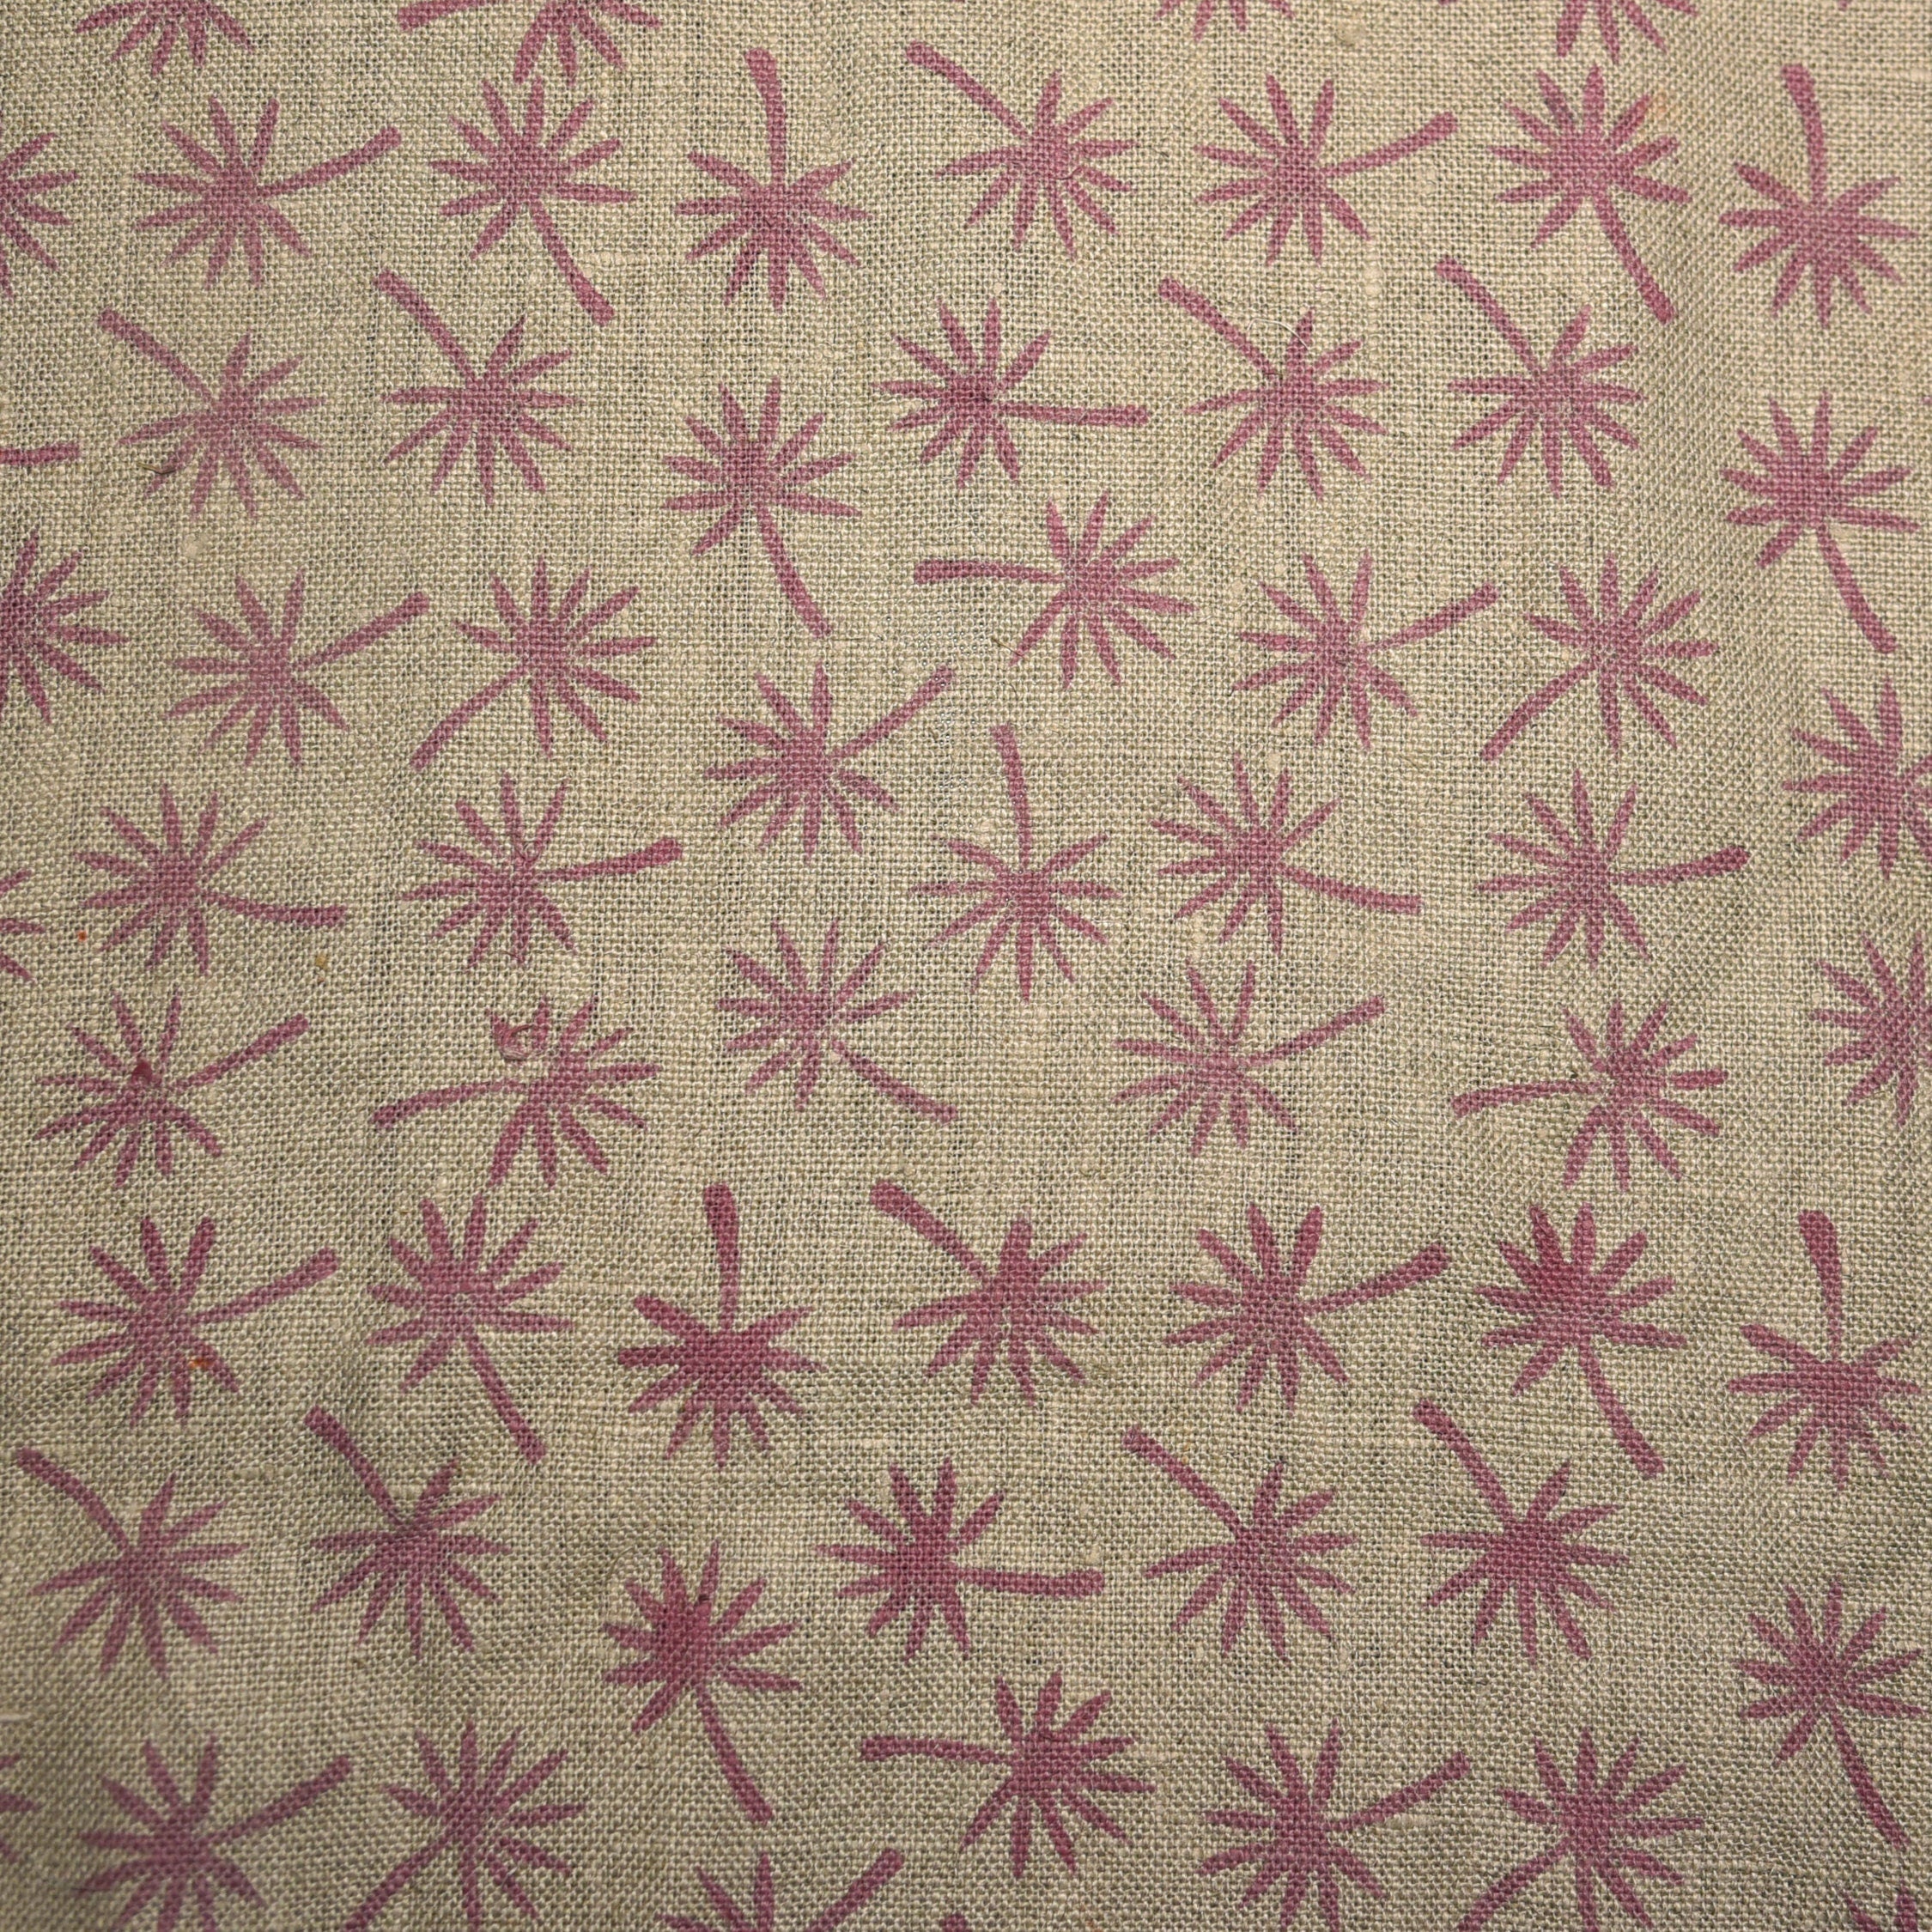 Coconut Tree  Handloom Linen Fabric Linen Fabric Flower Colour Upholstery Fabric, Pillow Cover,Thick Linen Fabric Natural Colour